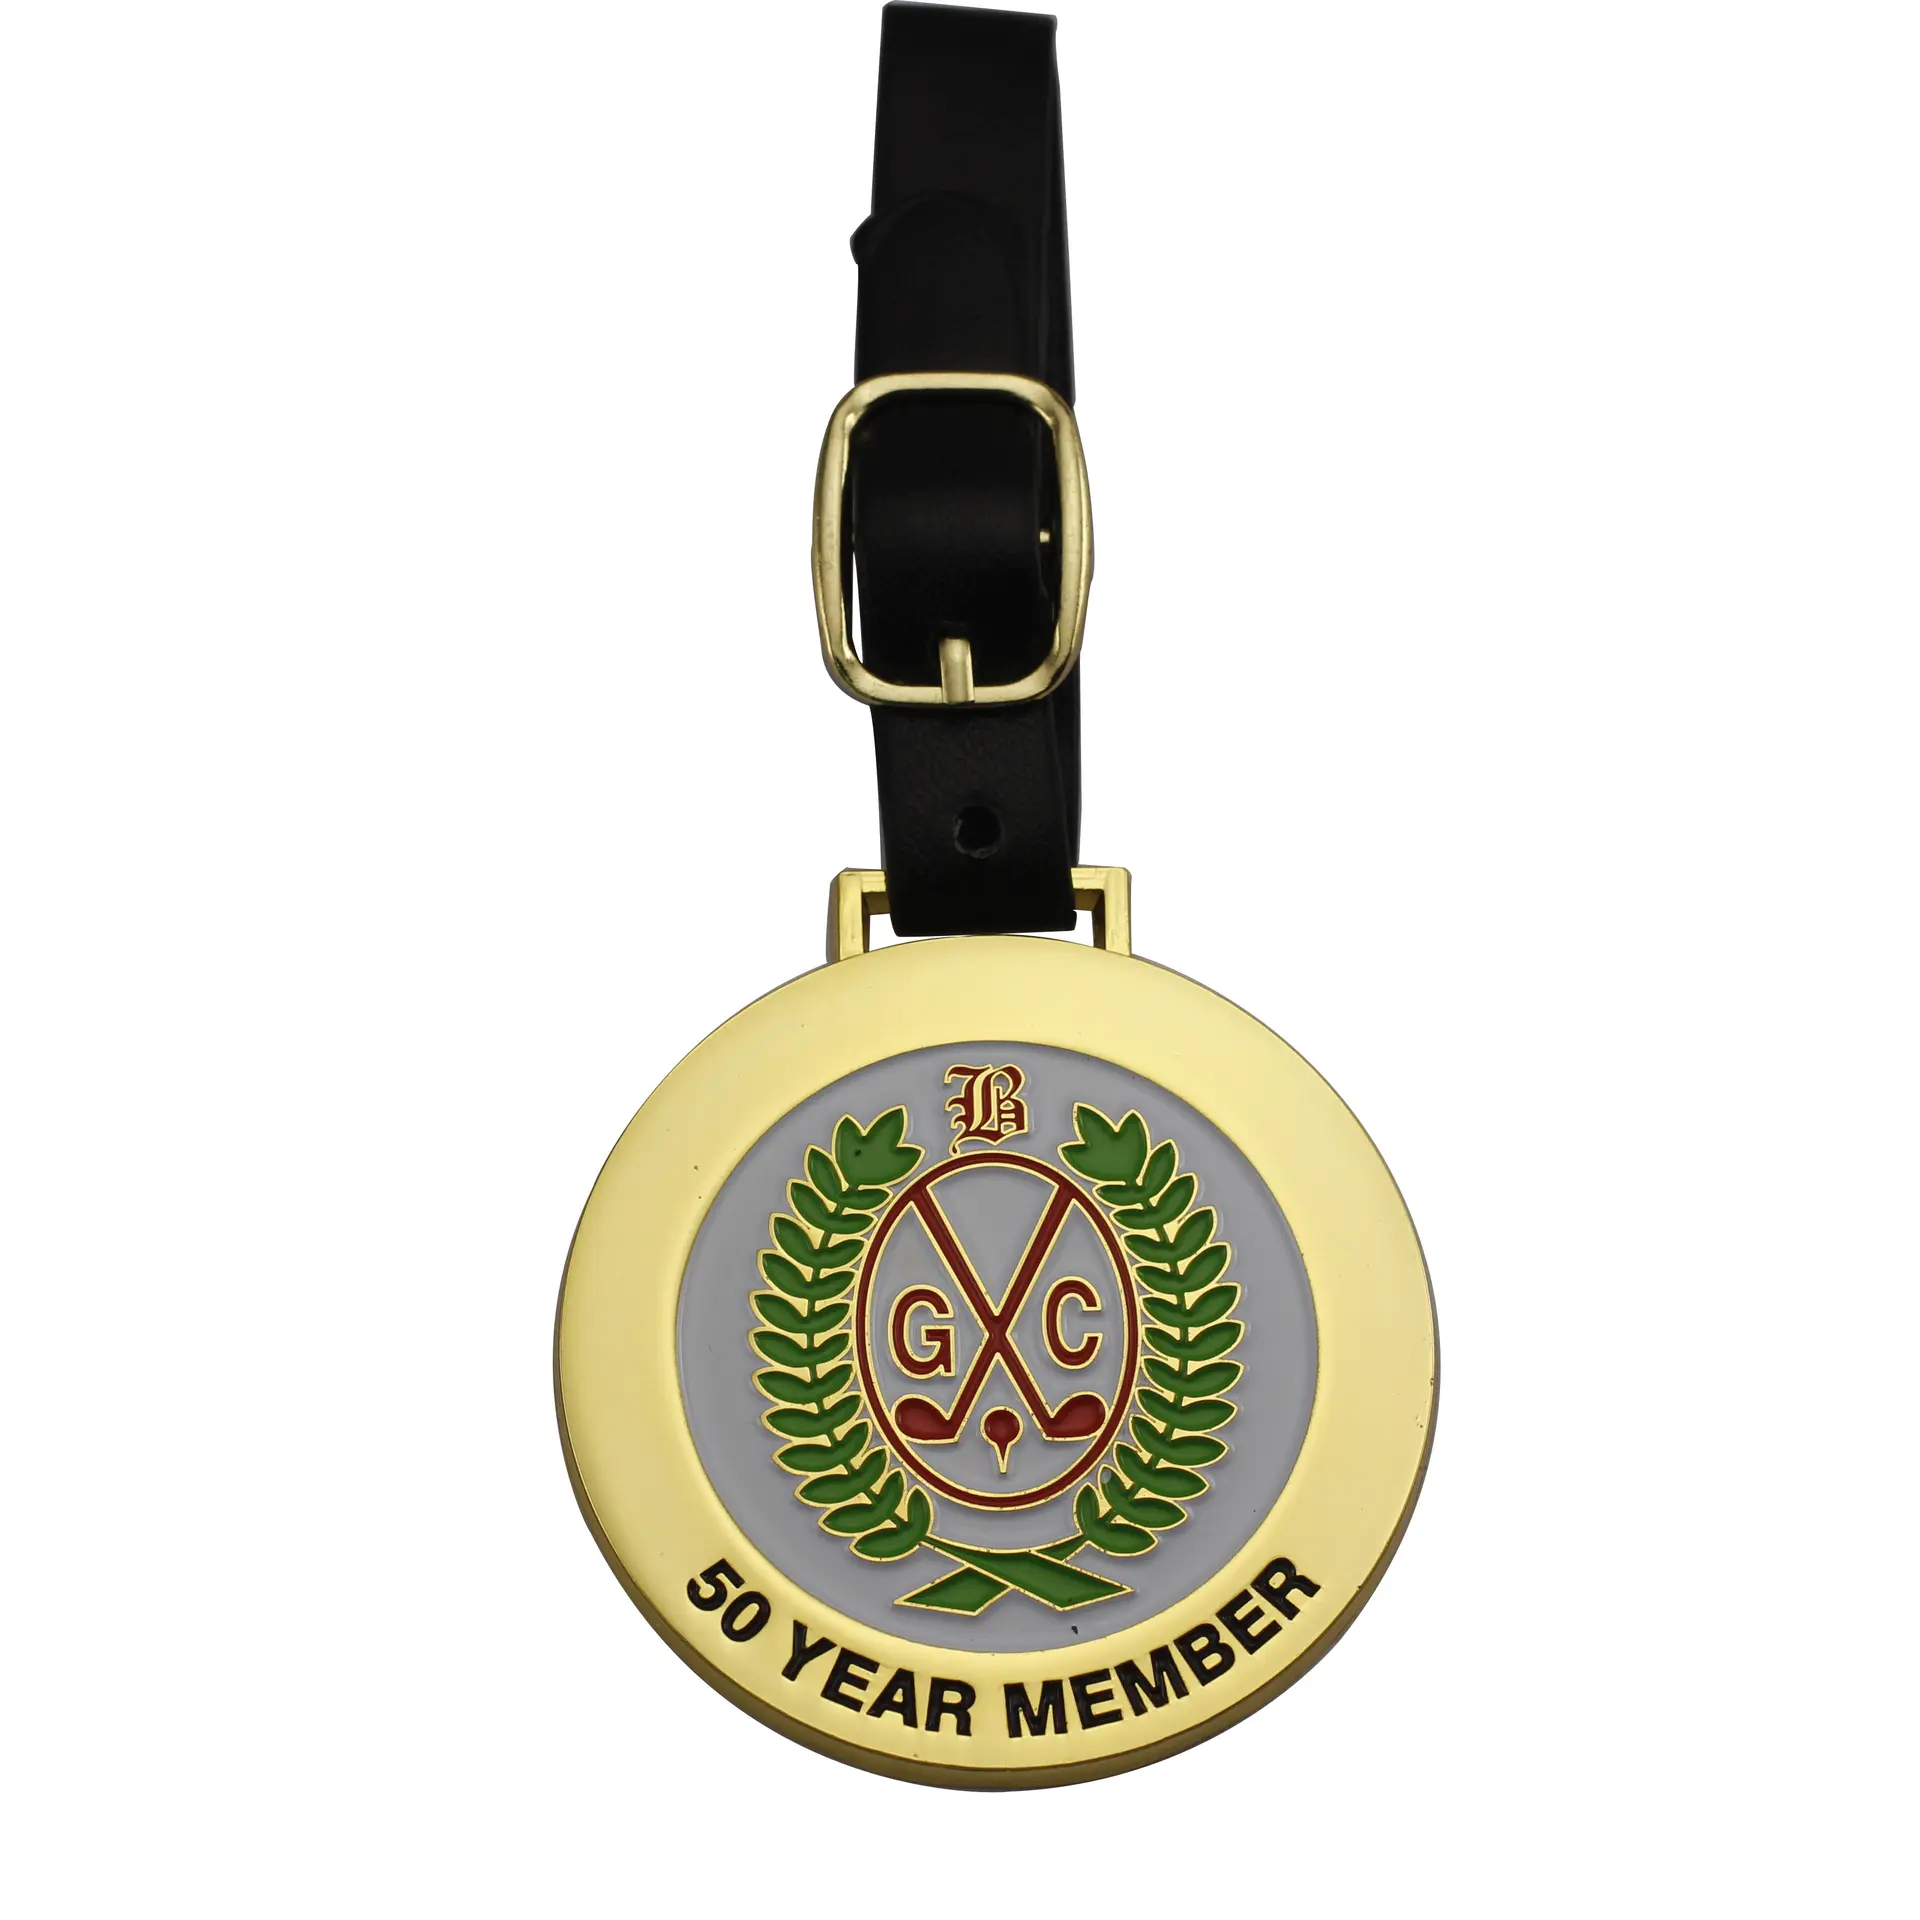 Hot sale customized golf club metal id tags with leather strap